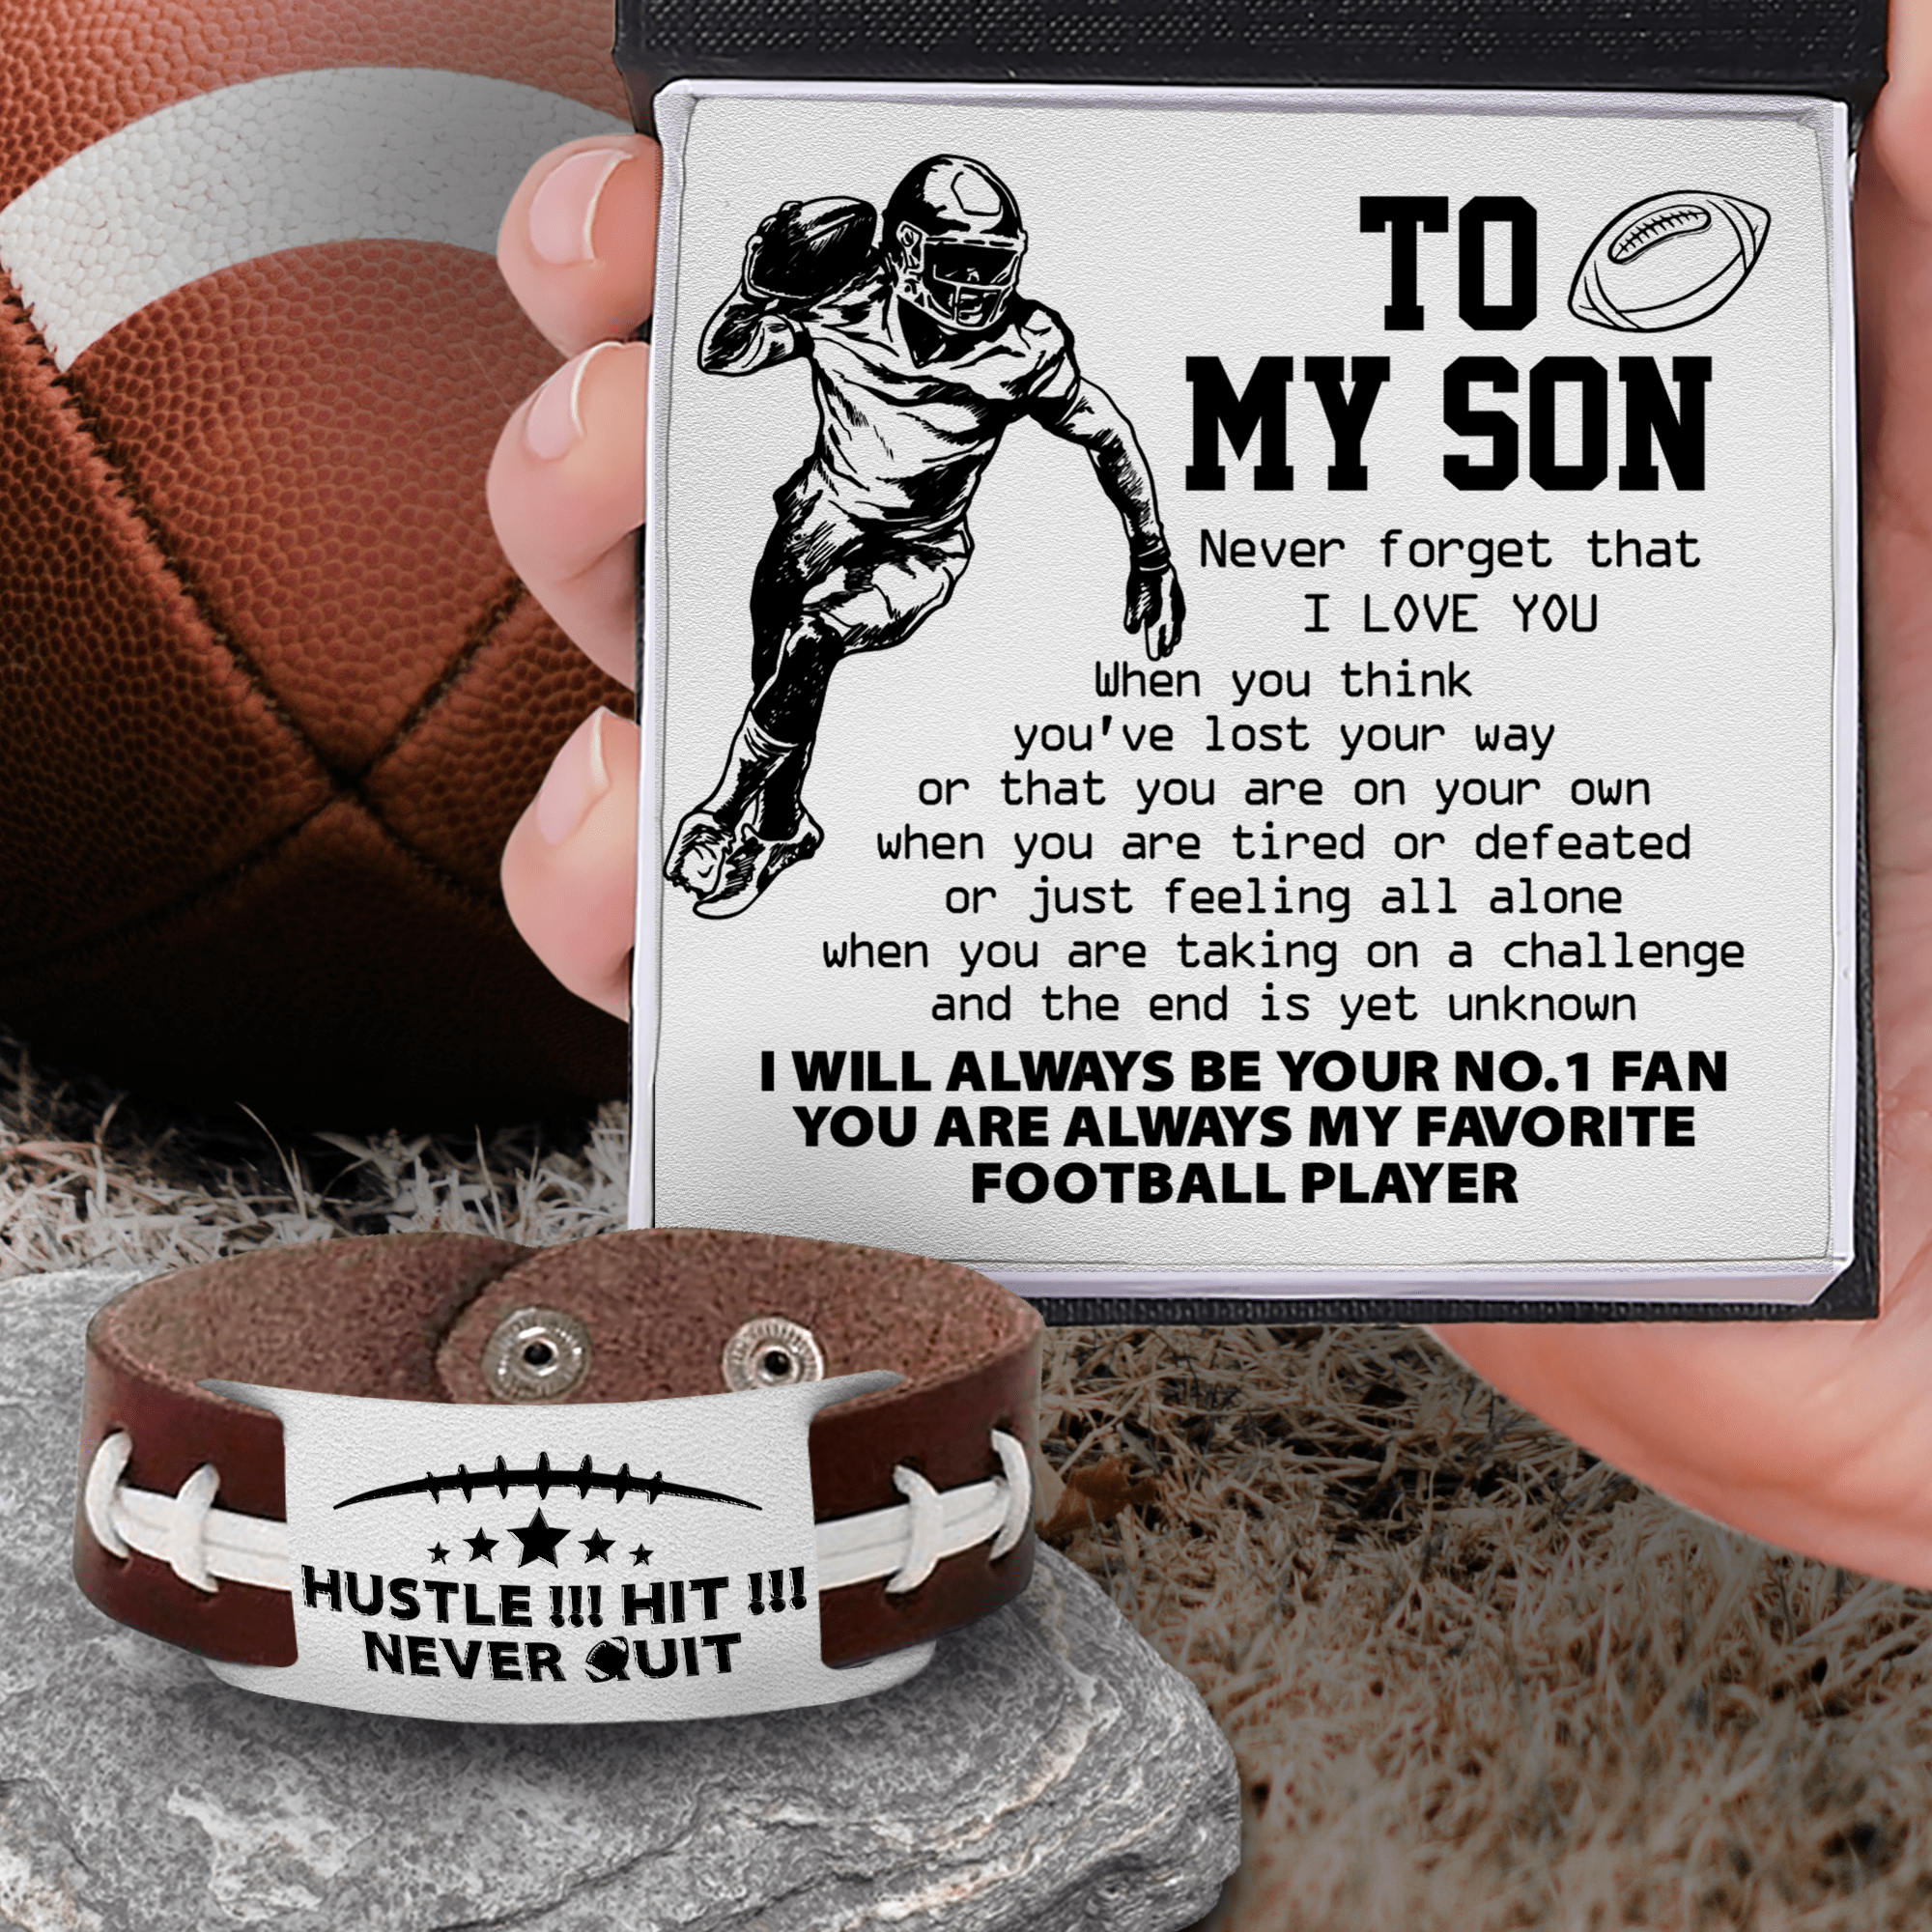 Football Bracelet - American Football - To My Son - I Will Always Be Your No.1 Fan - Gbzo16019